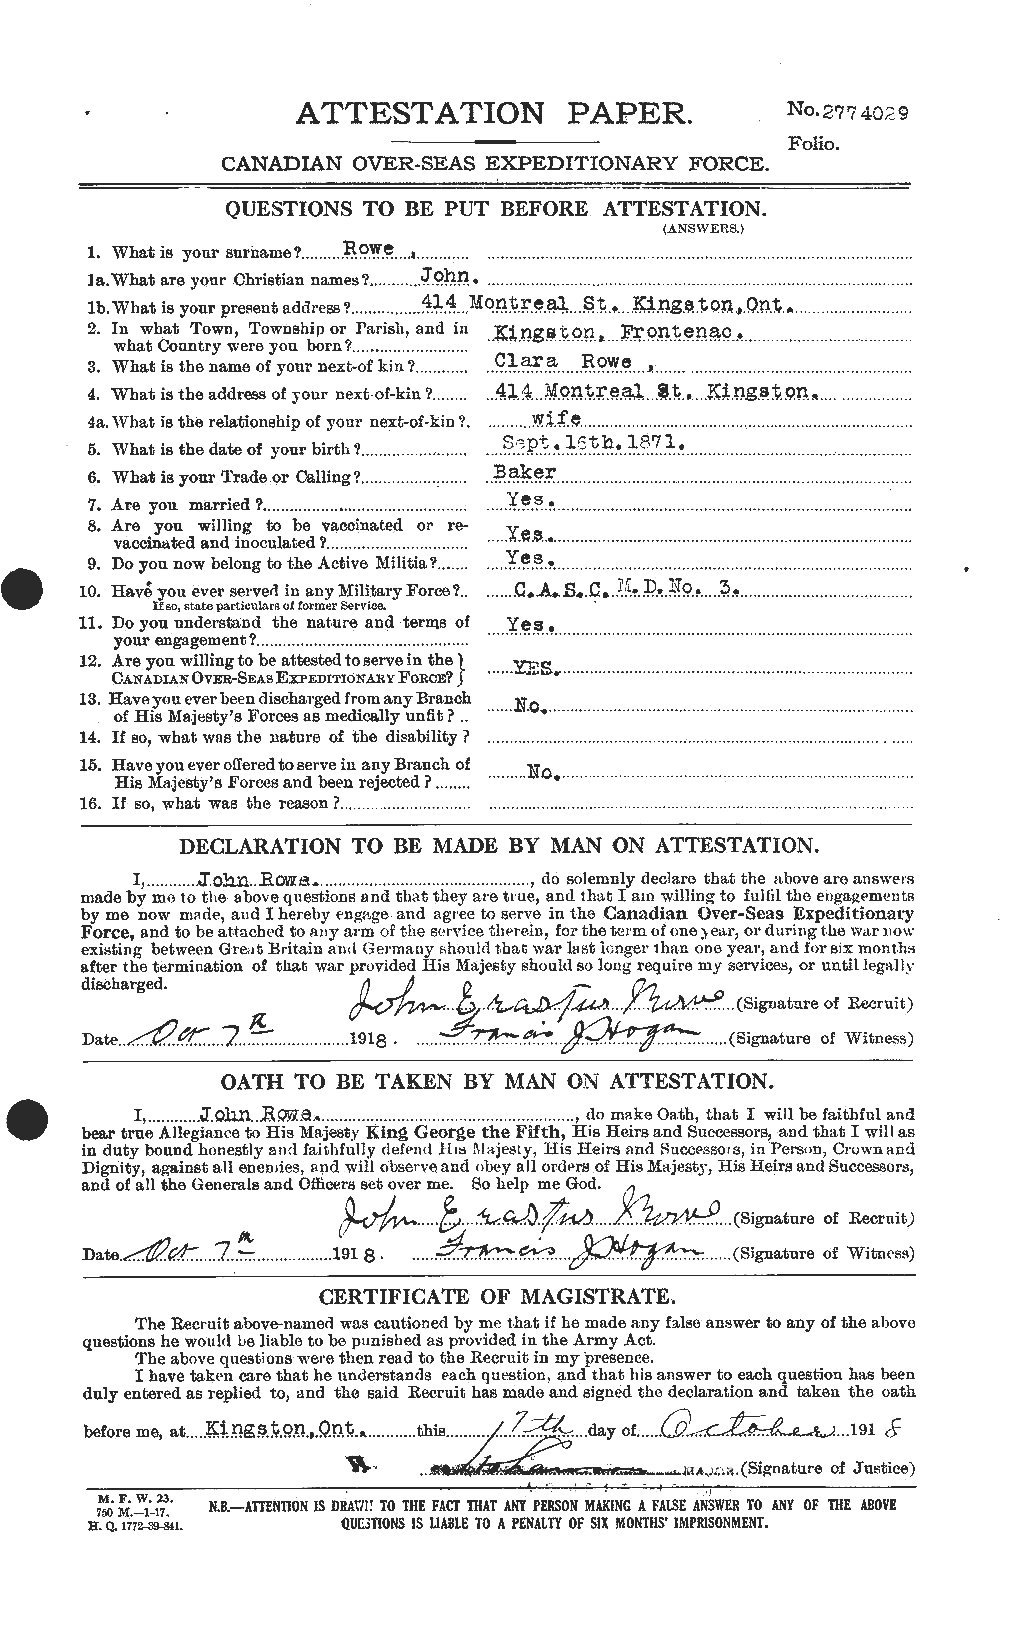 Personnel Records of the First World War - CEF 615924a